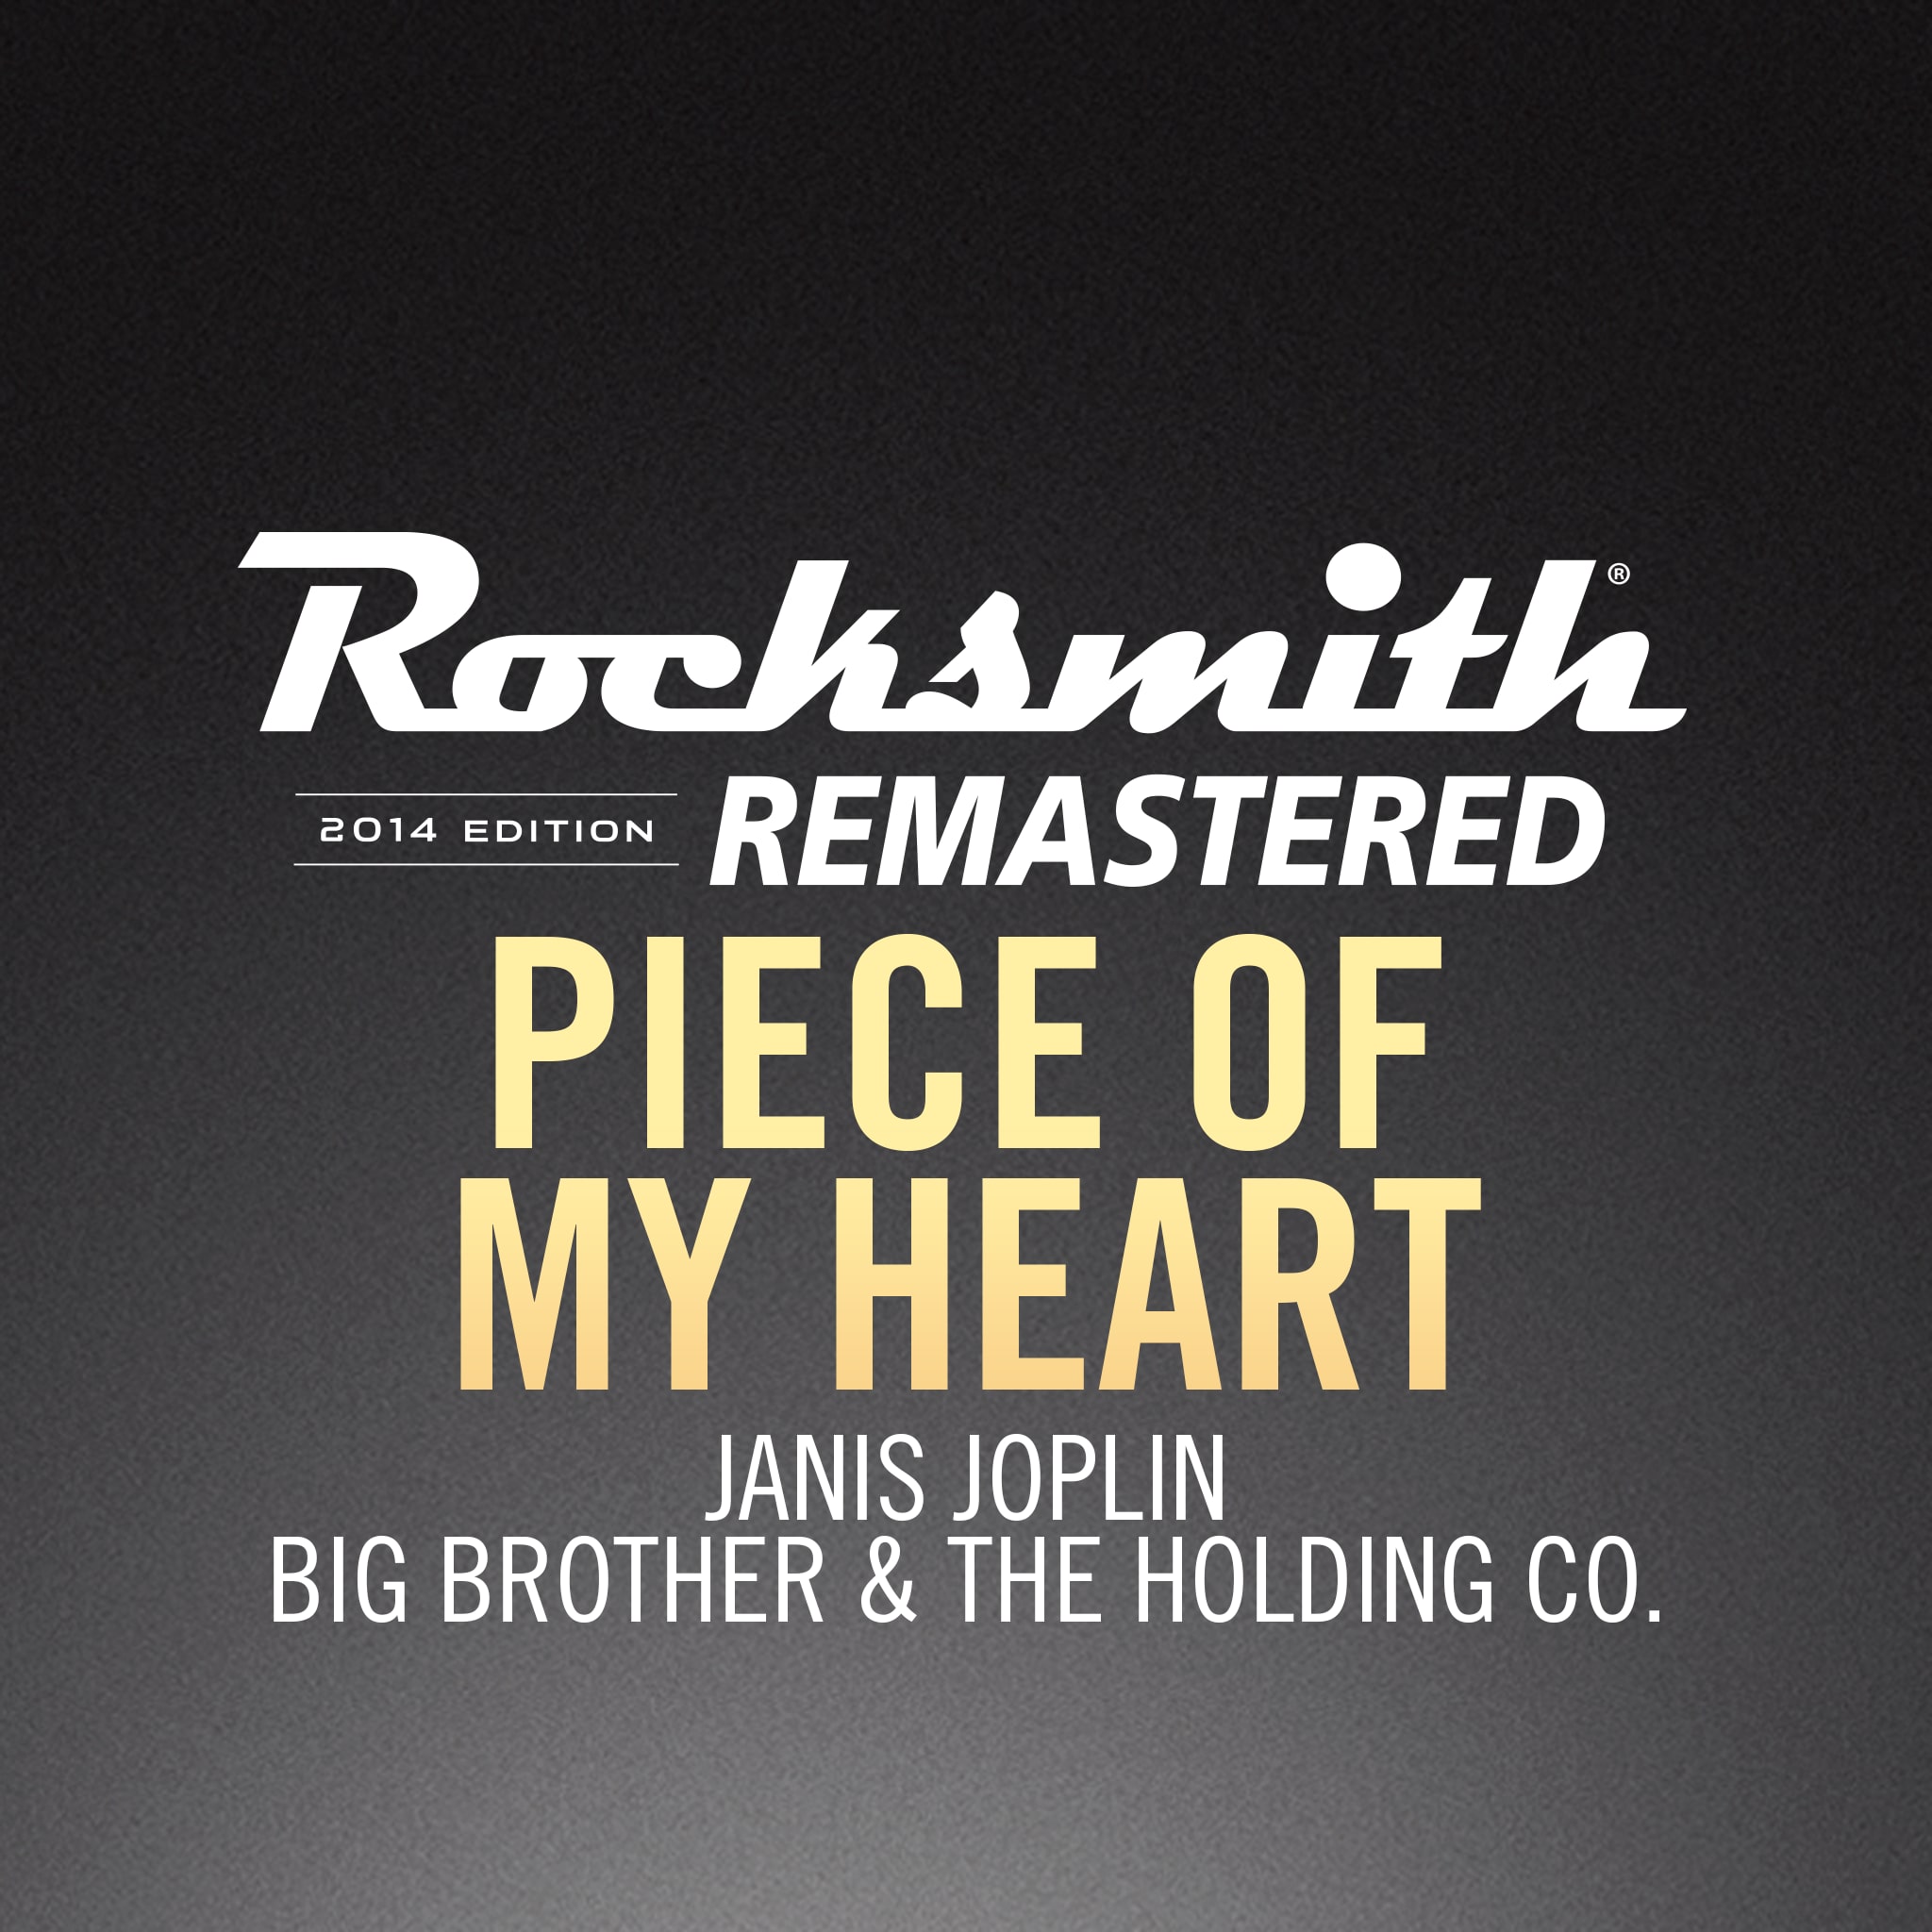 Piece of my Heart- Janis Joplin/Big Brother & The Holding Co